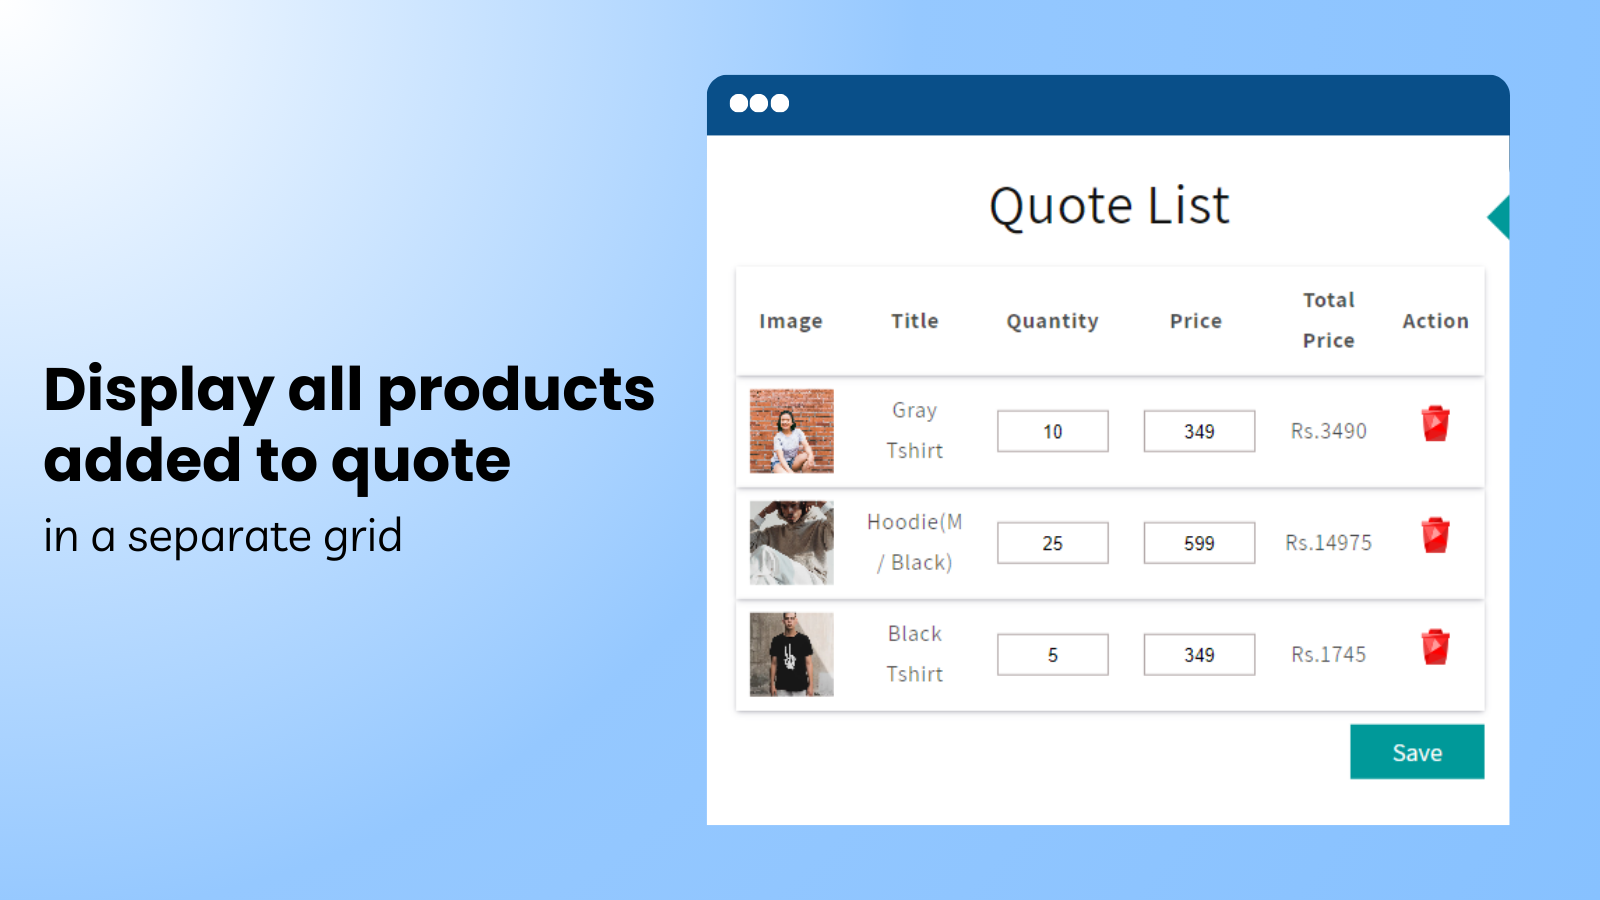 Display all products added to the quote in a separate grid